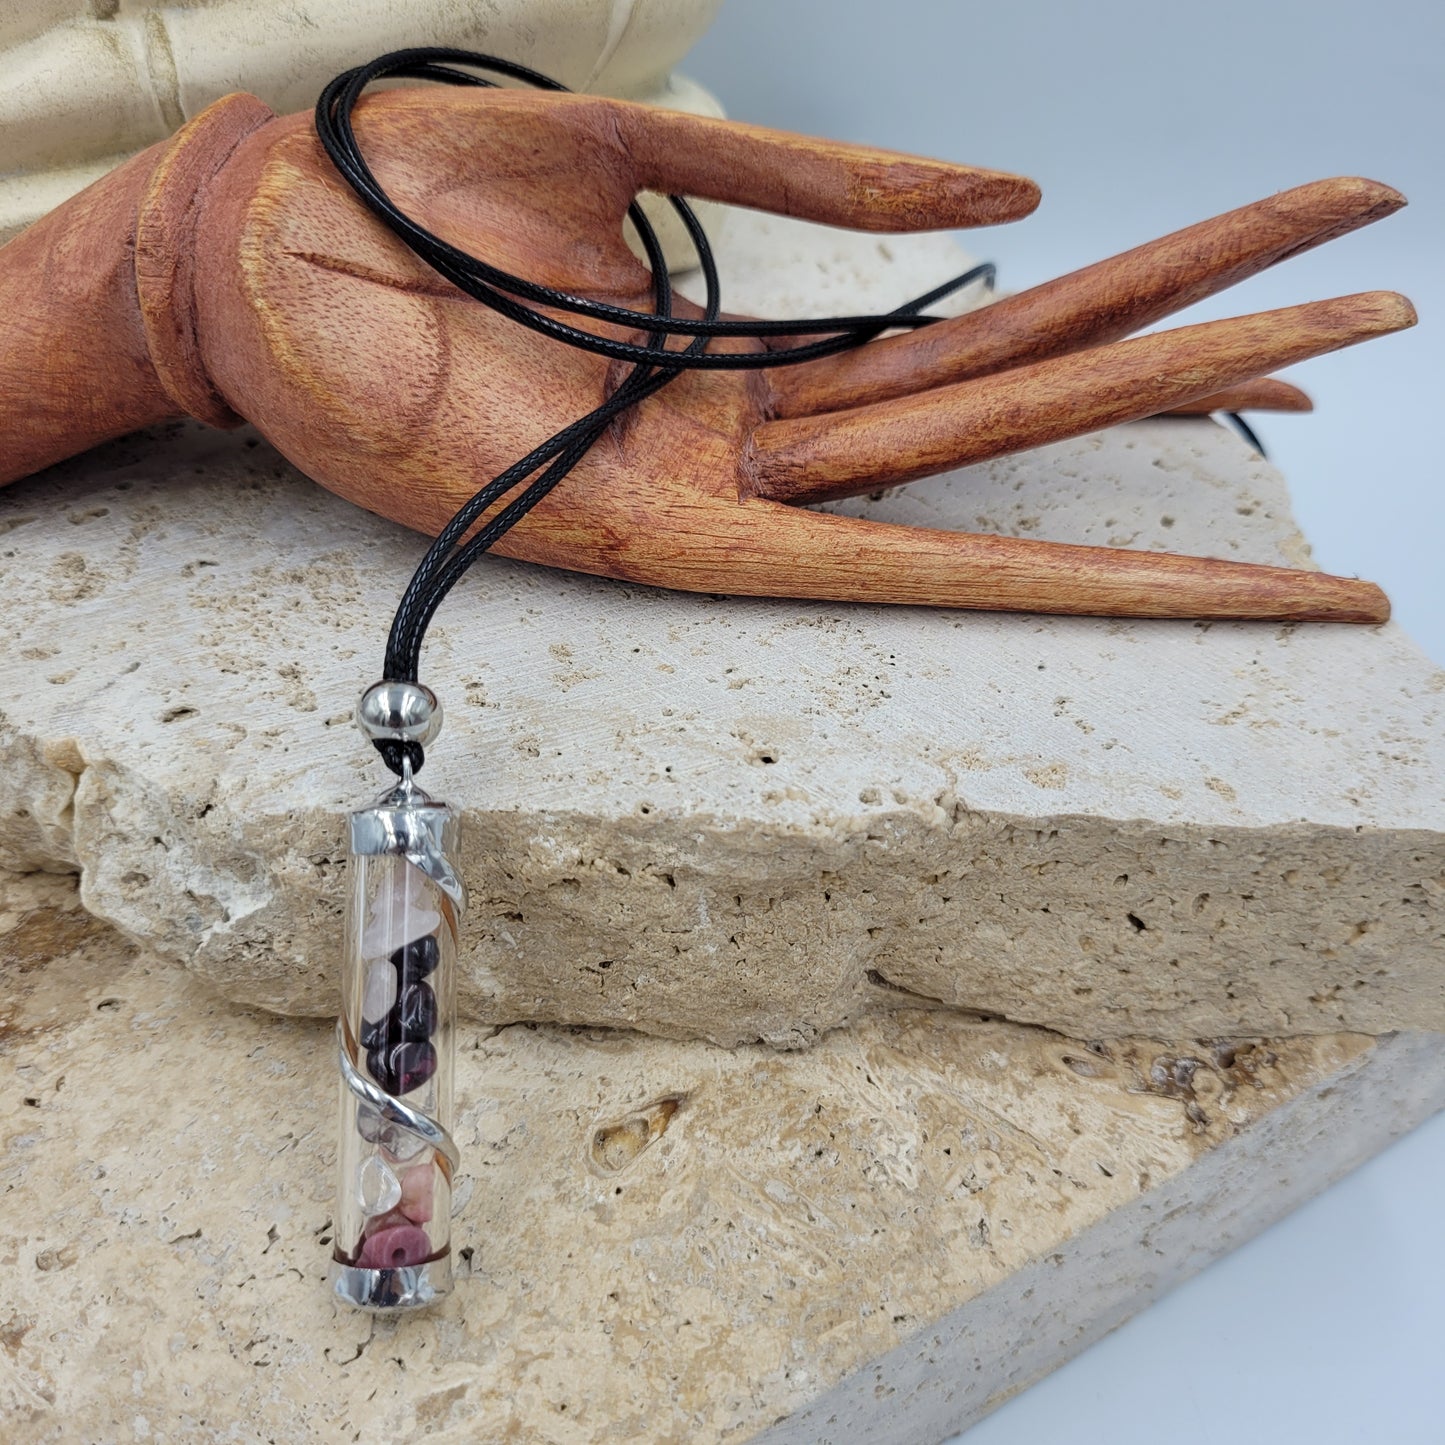 Passion Crystal Filled Tube Necklace